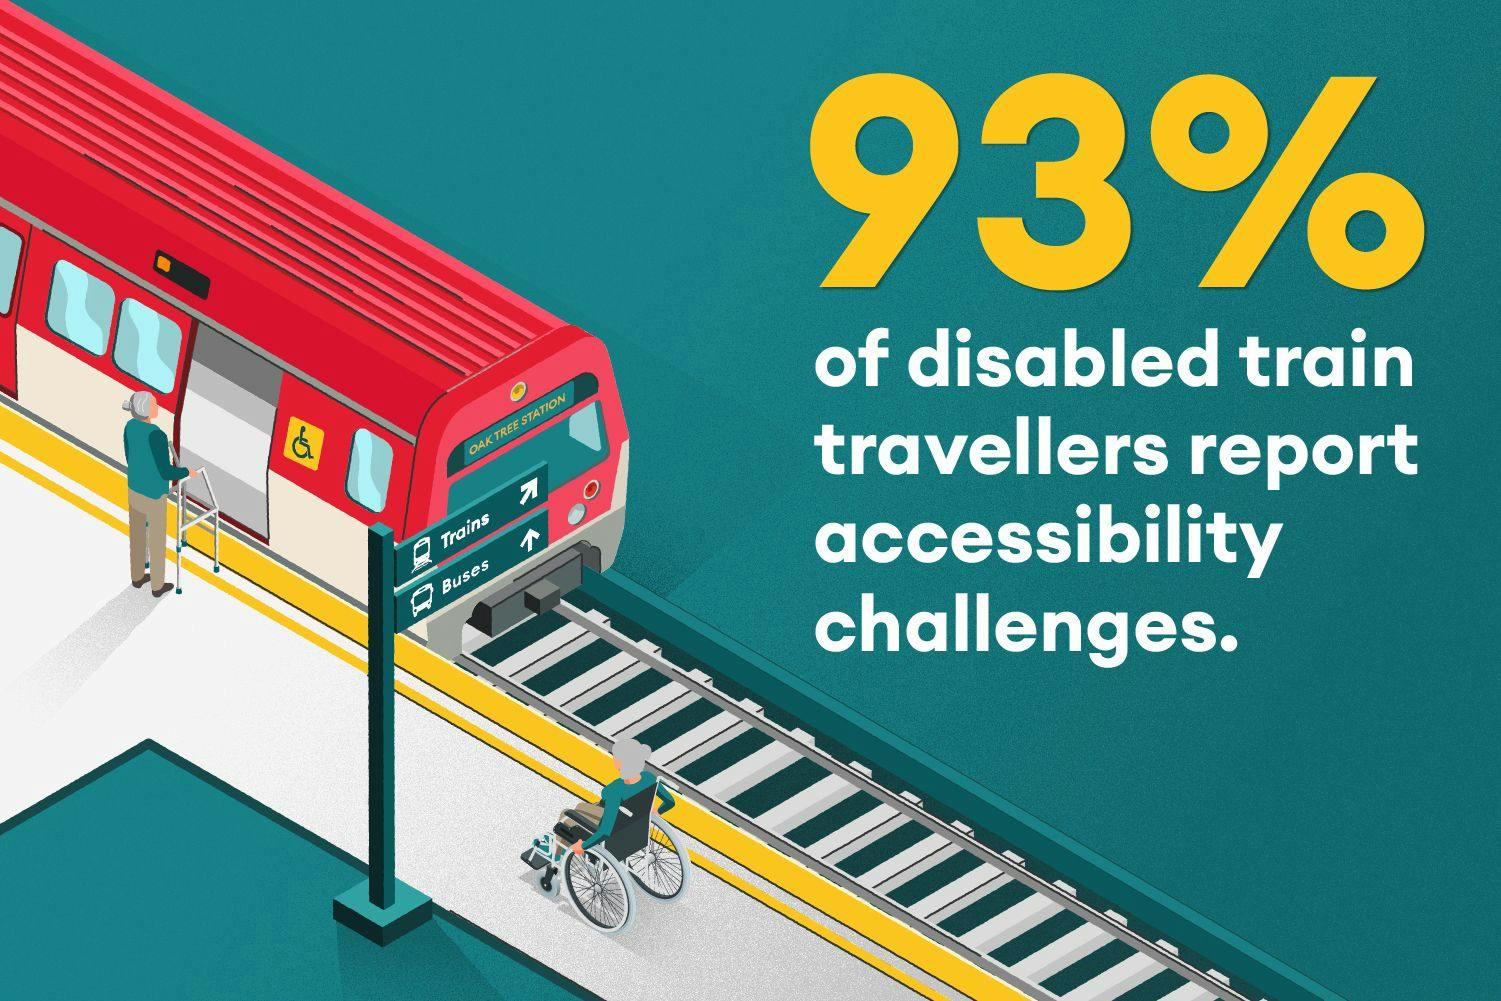 93% of disabled train travellers report accessibility challenges